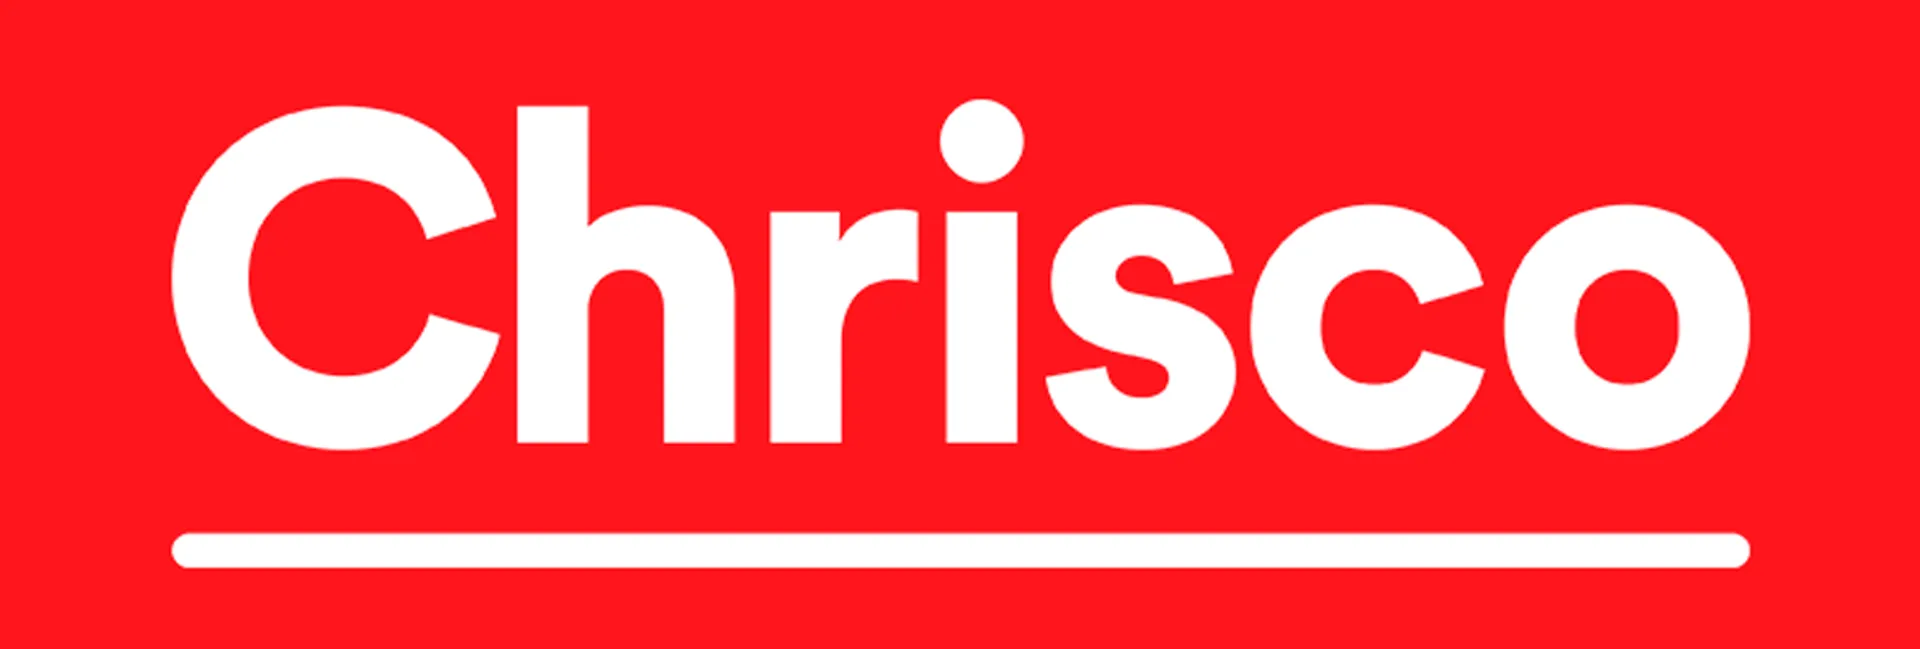 CHRISCO logo. Current weekly ad